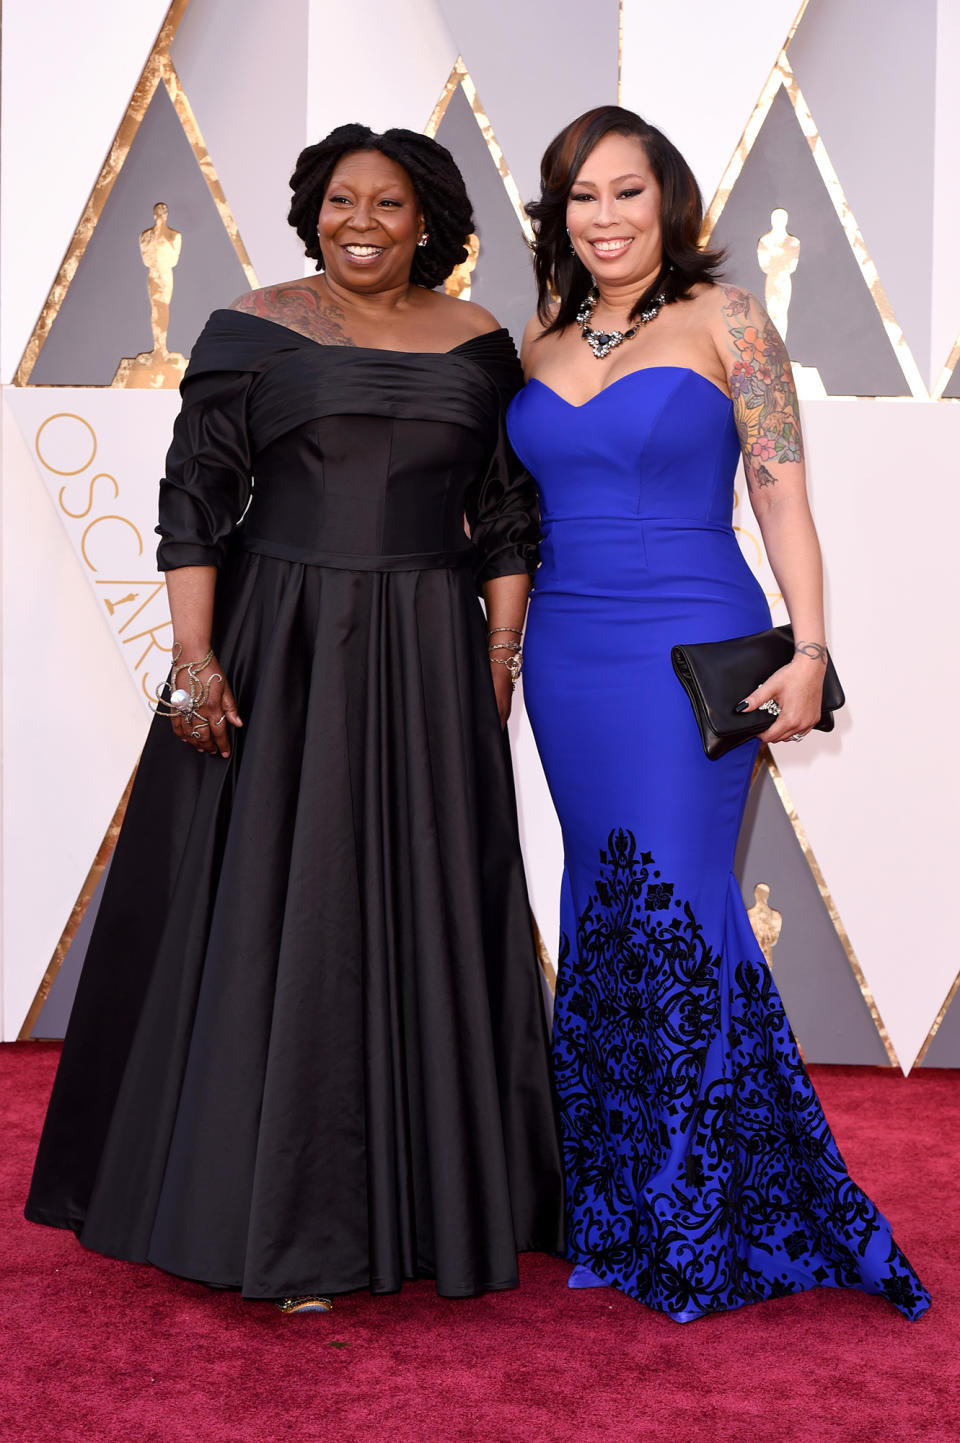 Alex and Whoopi are very close! The film producer told Wendy Williams in 2015 that she and her movie star mom talk "multiple times a day." On The View, the Corrina, Corrina actress made a similar statement, referring to Alex as her "best friend." "She's somebody who makes me laugh, like 'bwaha!' laugh, and we can talk to each other at any time of the day or night," Whoopi said of her daughter. At Alex’s 40th birthday party in 2014, Whoopi told the crowd, "Alex is a better mother to her three kids than I ever was," in a heartfelt speech to her daughter, per Page Six.